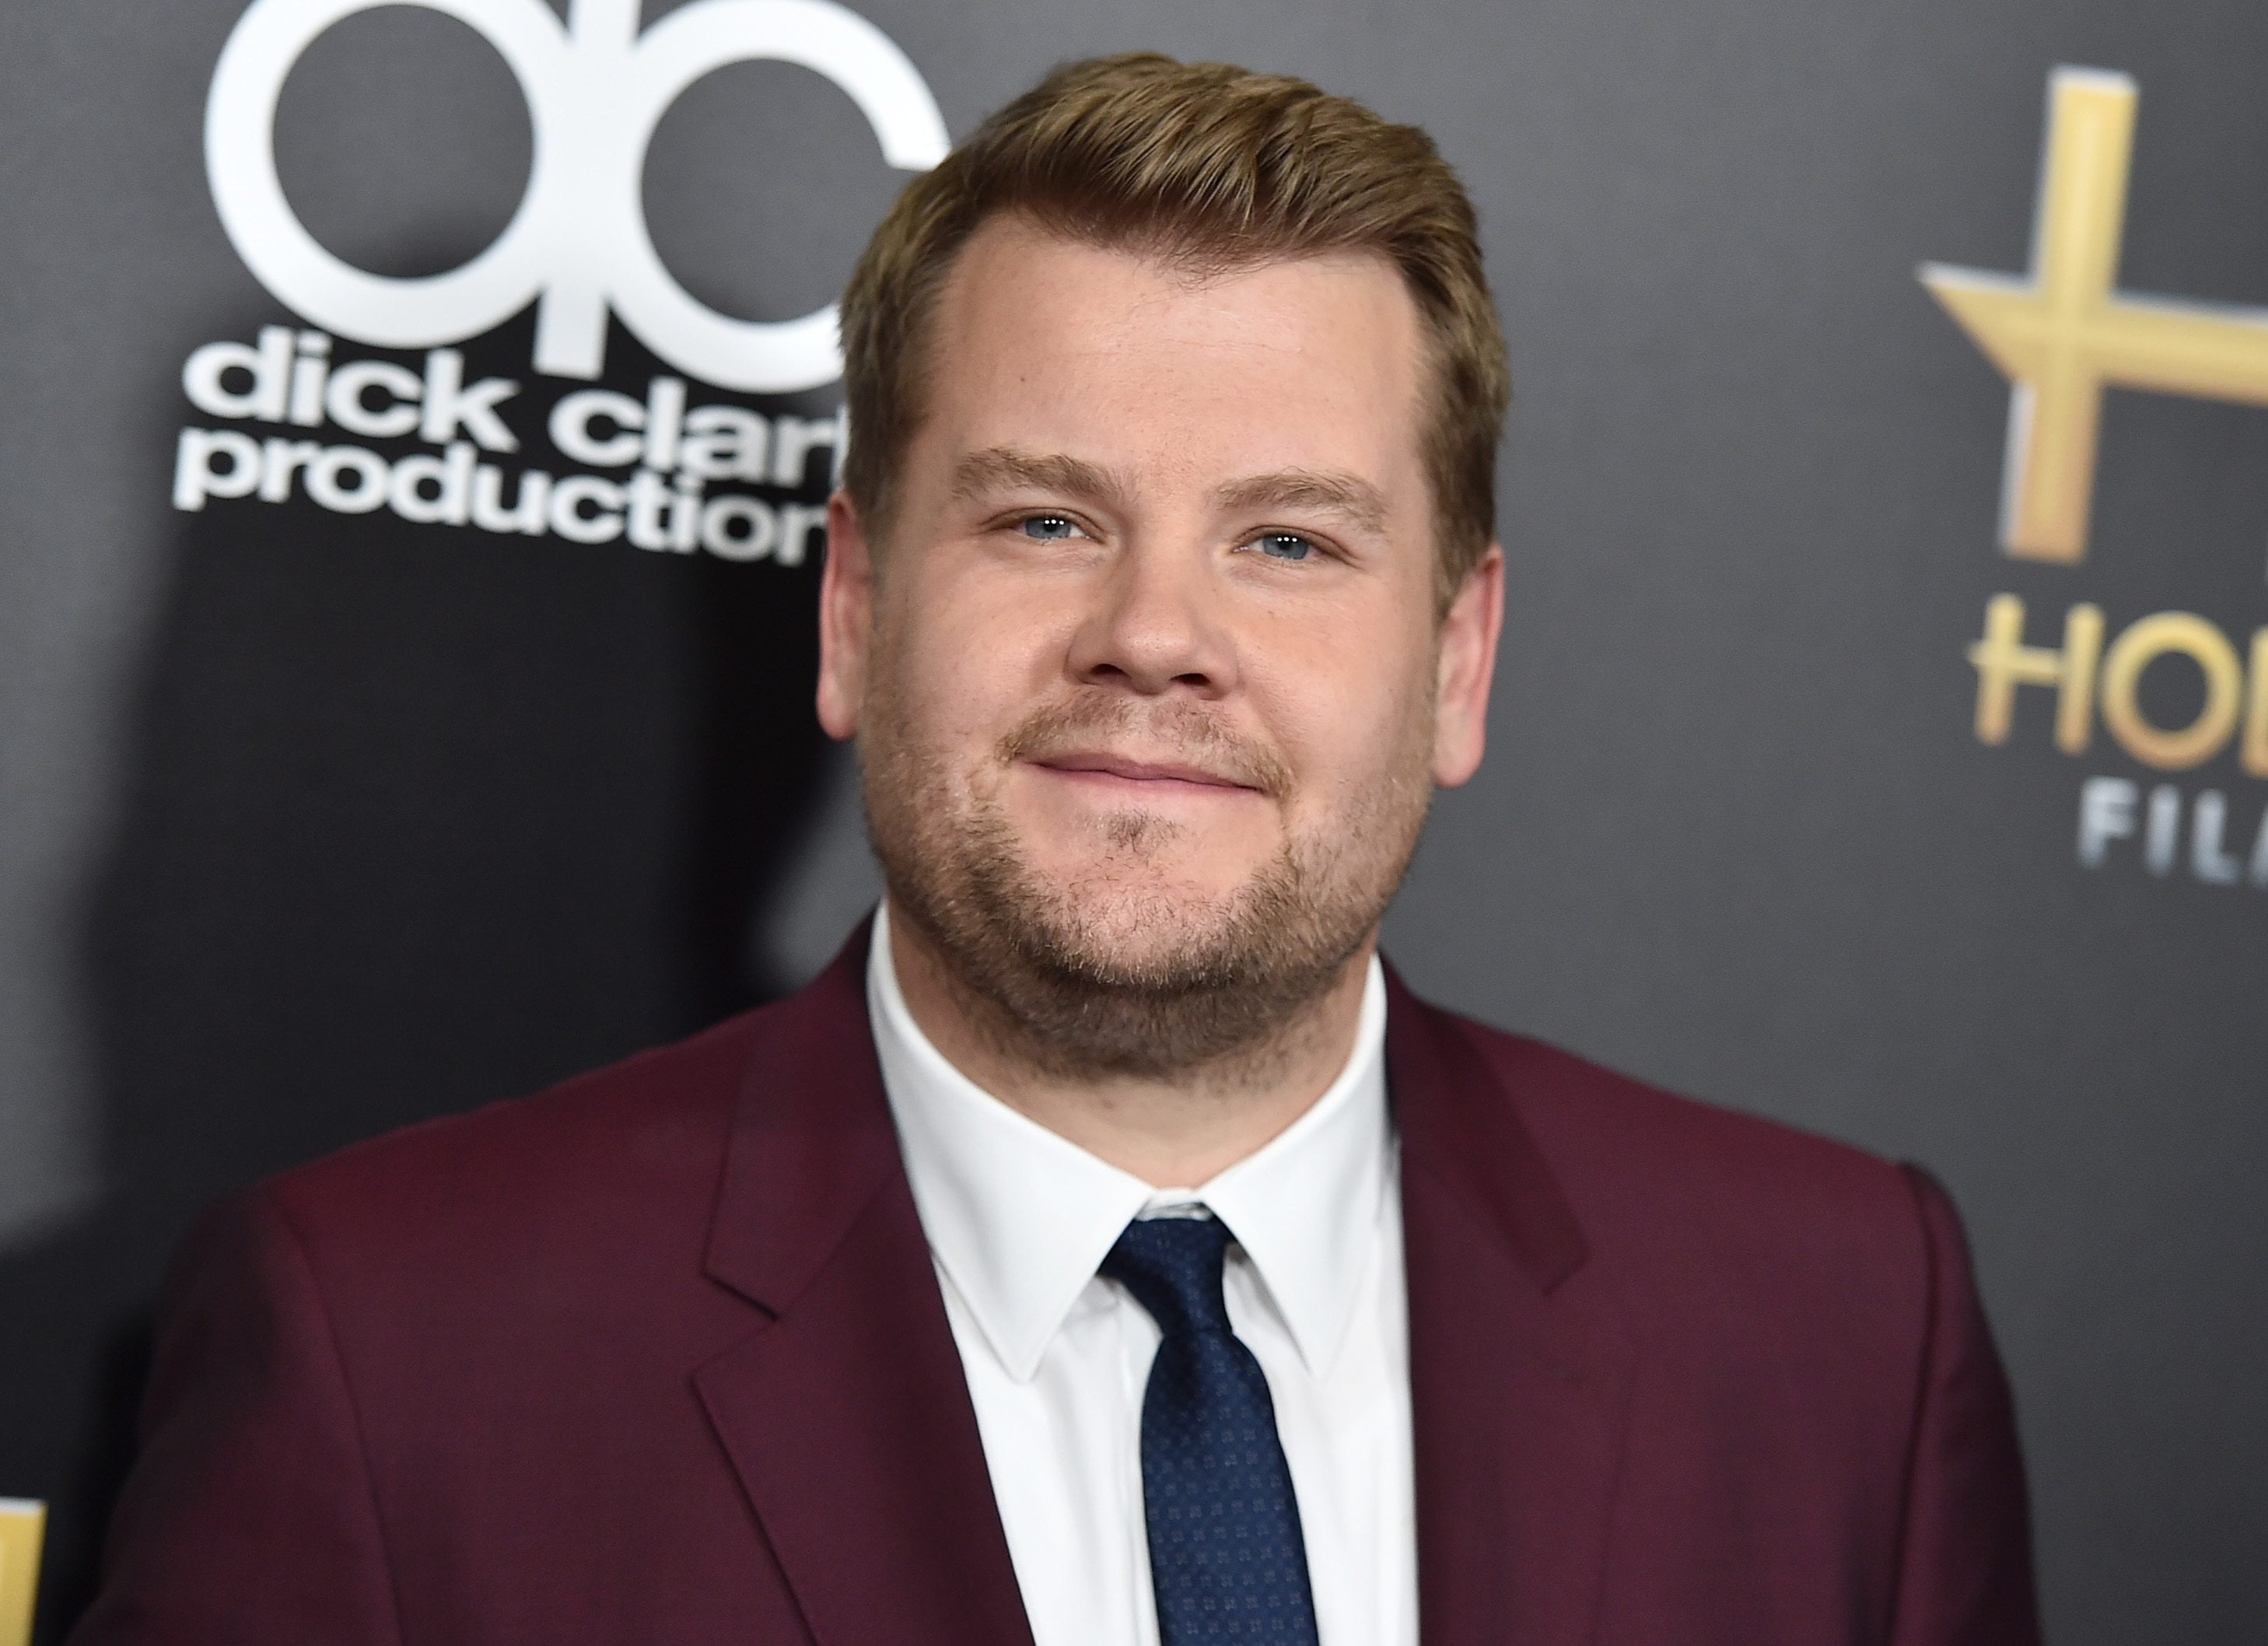 James Corden, host of CBS&#039; &quot;The Late Late Show&quot; and past Tony Award winner, will host the Tony Awards ceremony broadcast June 12 on CBS.